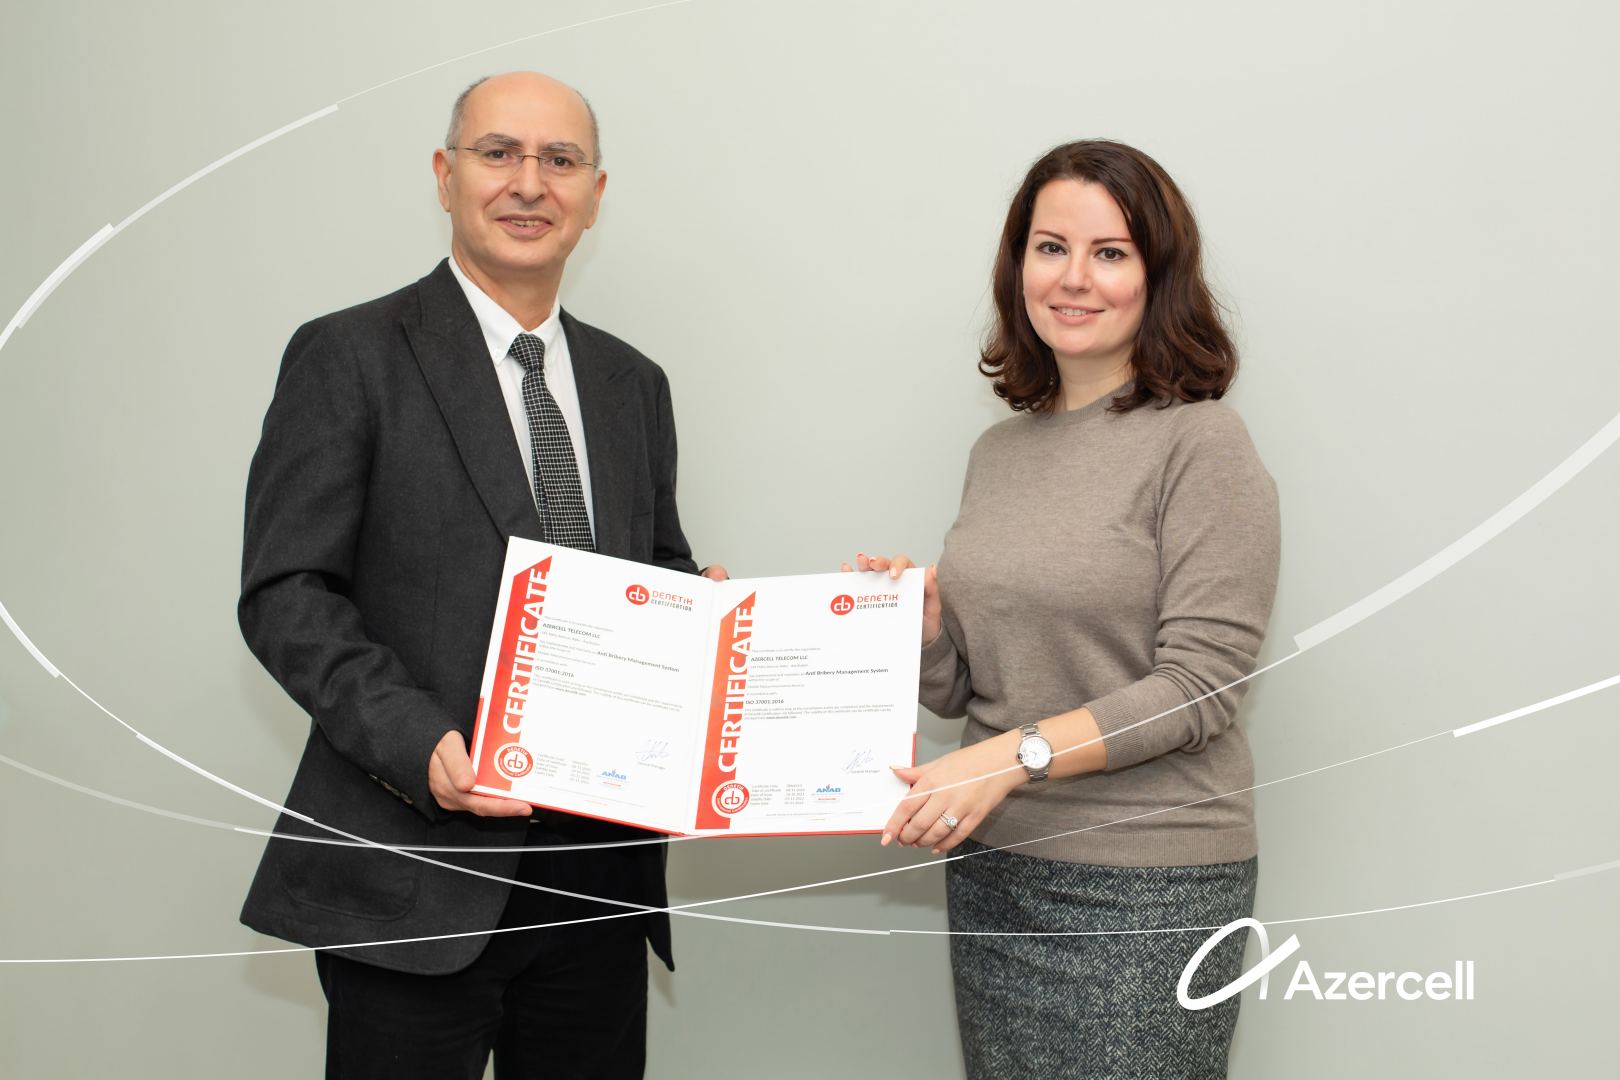 Azercell once again bestowed with ISO 37001:2016 Anti-bribery Management Systems standard of compliance